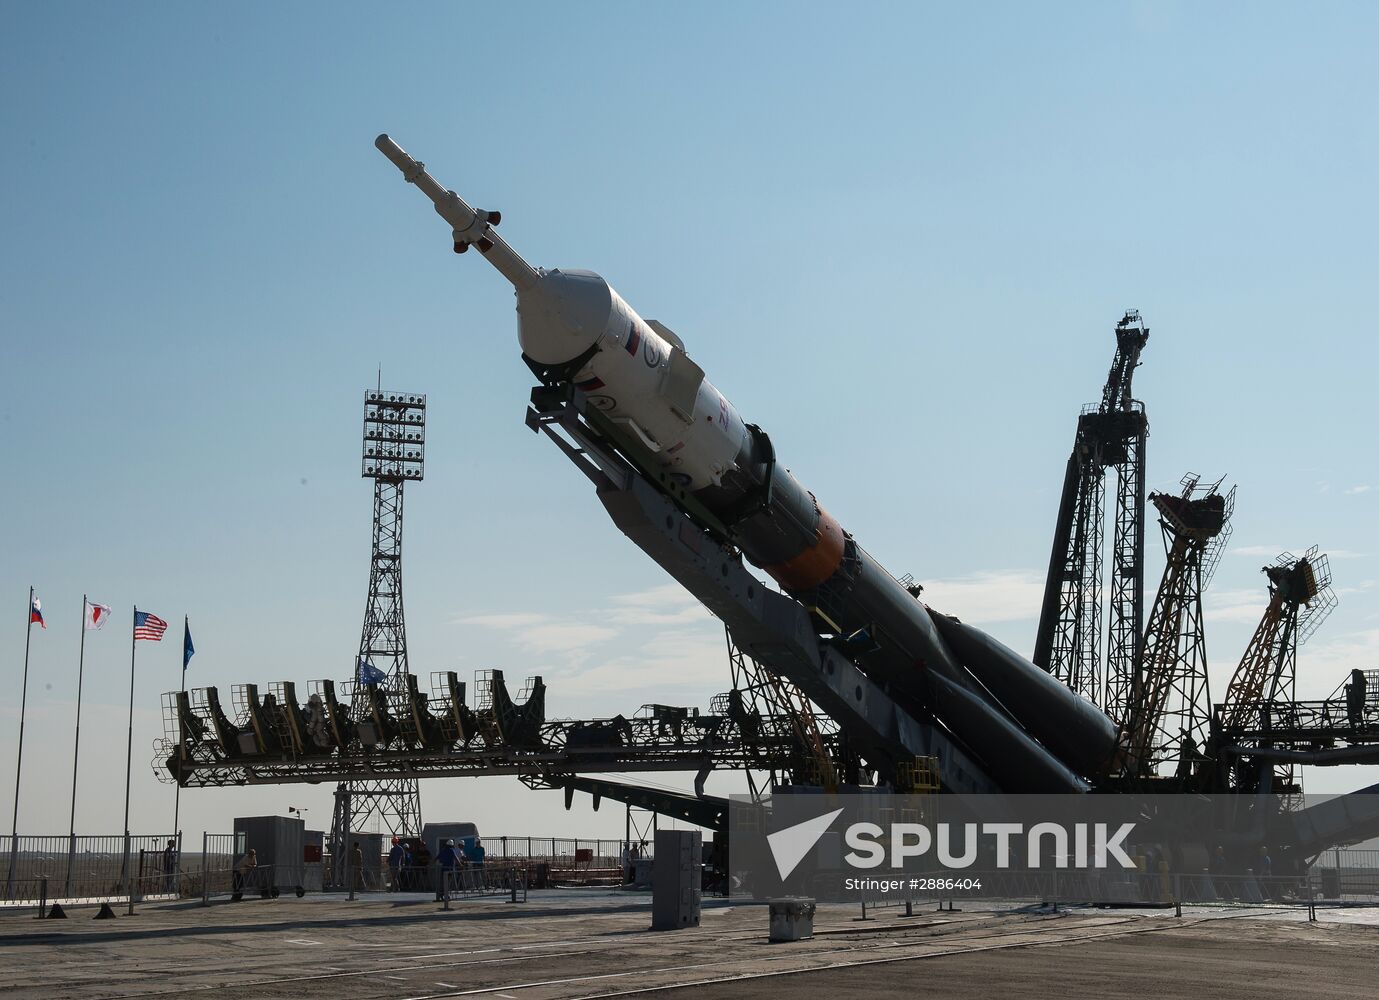 Soyuz-FG carrier rocket with Soyuz-MS manned spacecraft moved onto launch pad